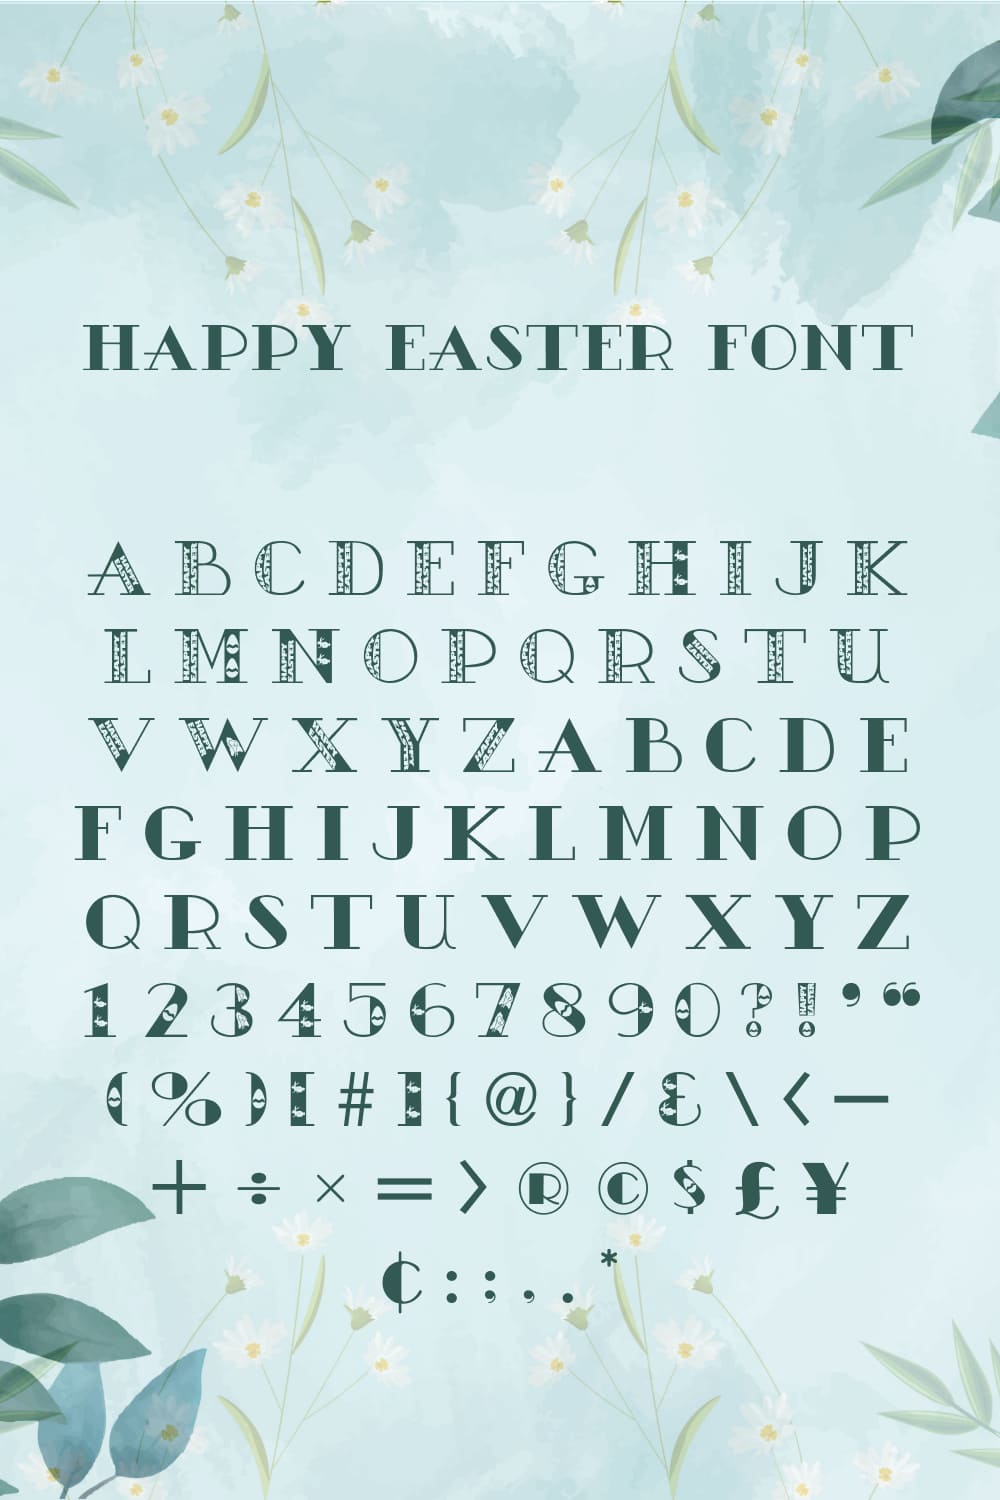 Cool funny easter font on a light green background.